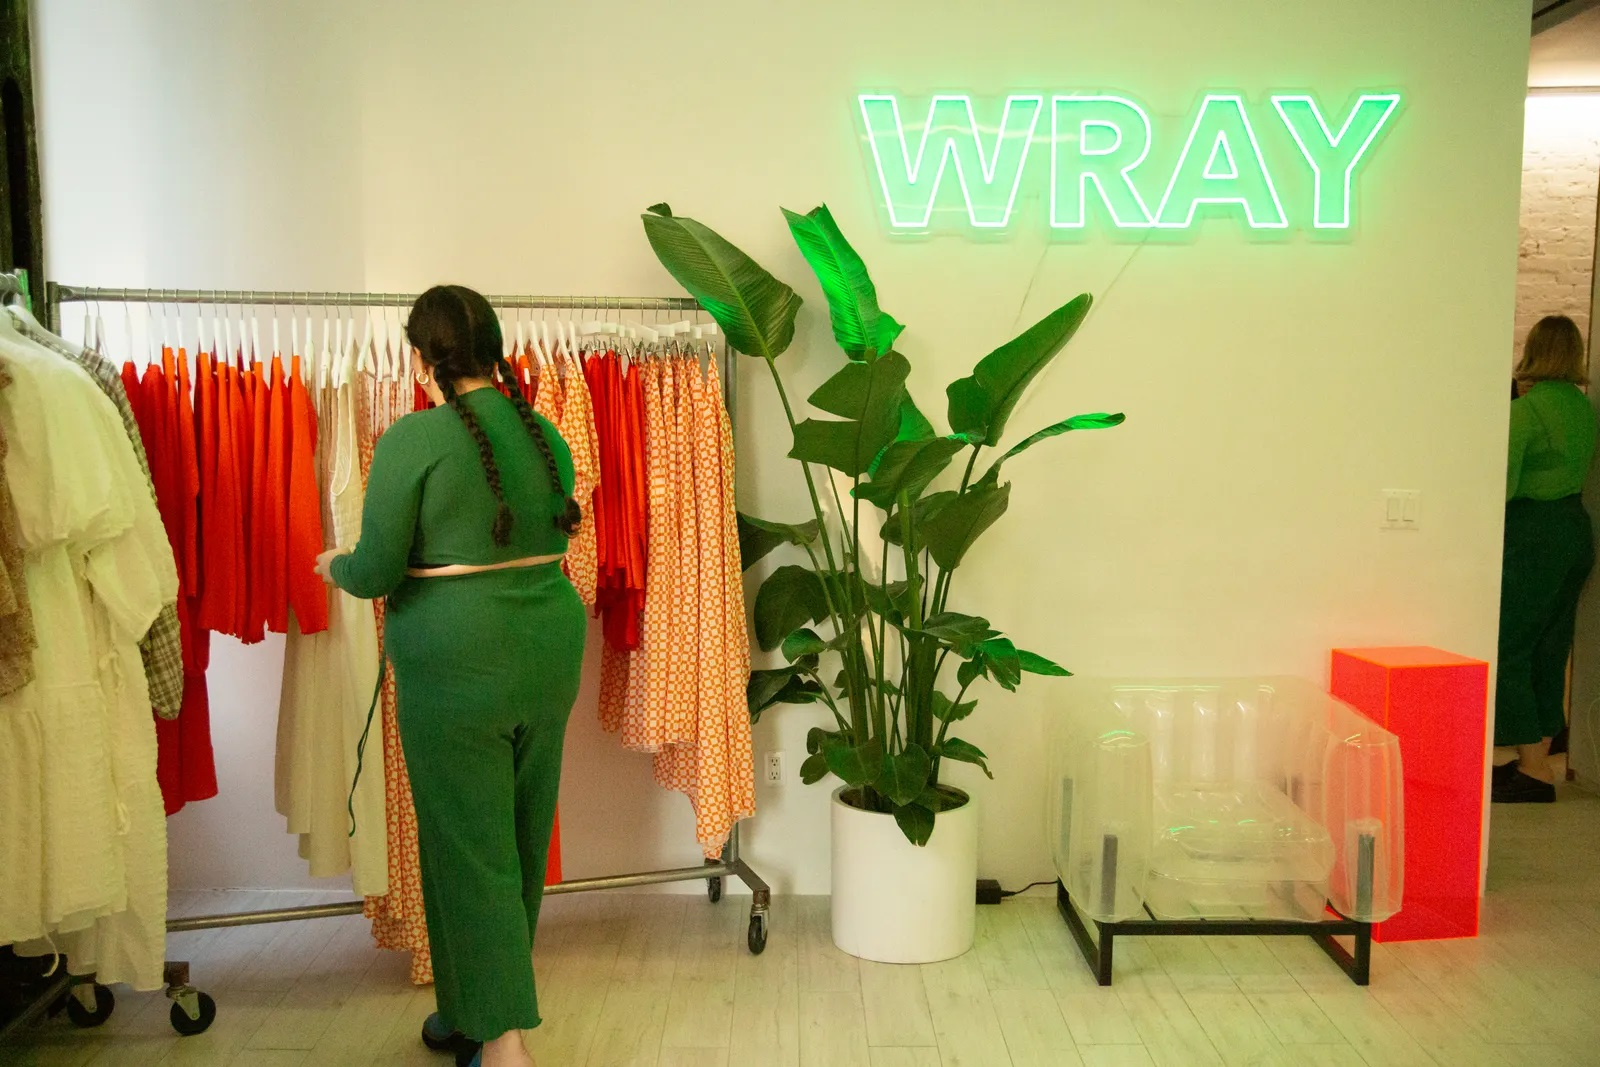 Latinx-Owned Fashion Brand Opens First Physical Store